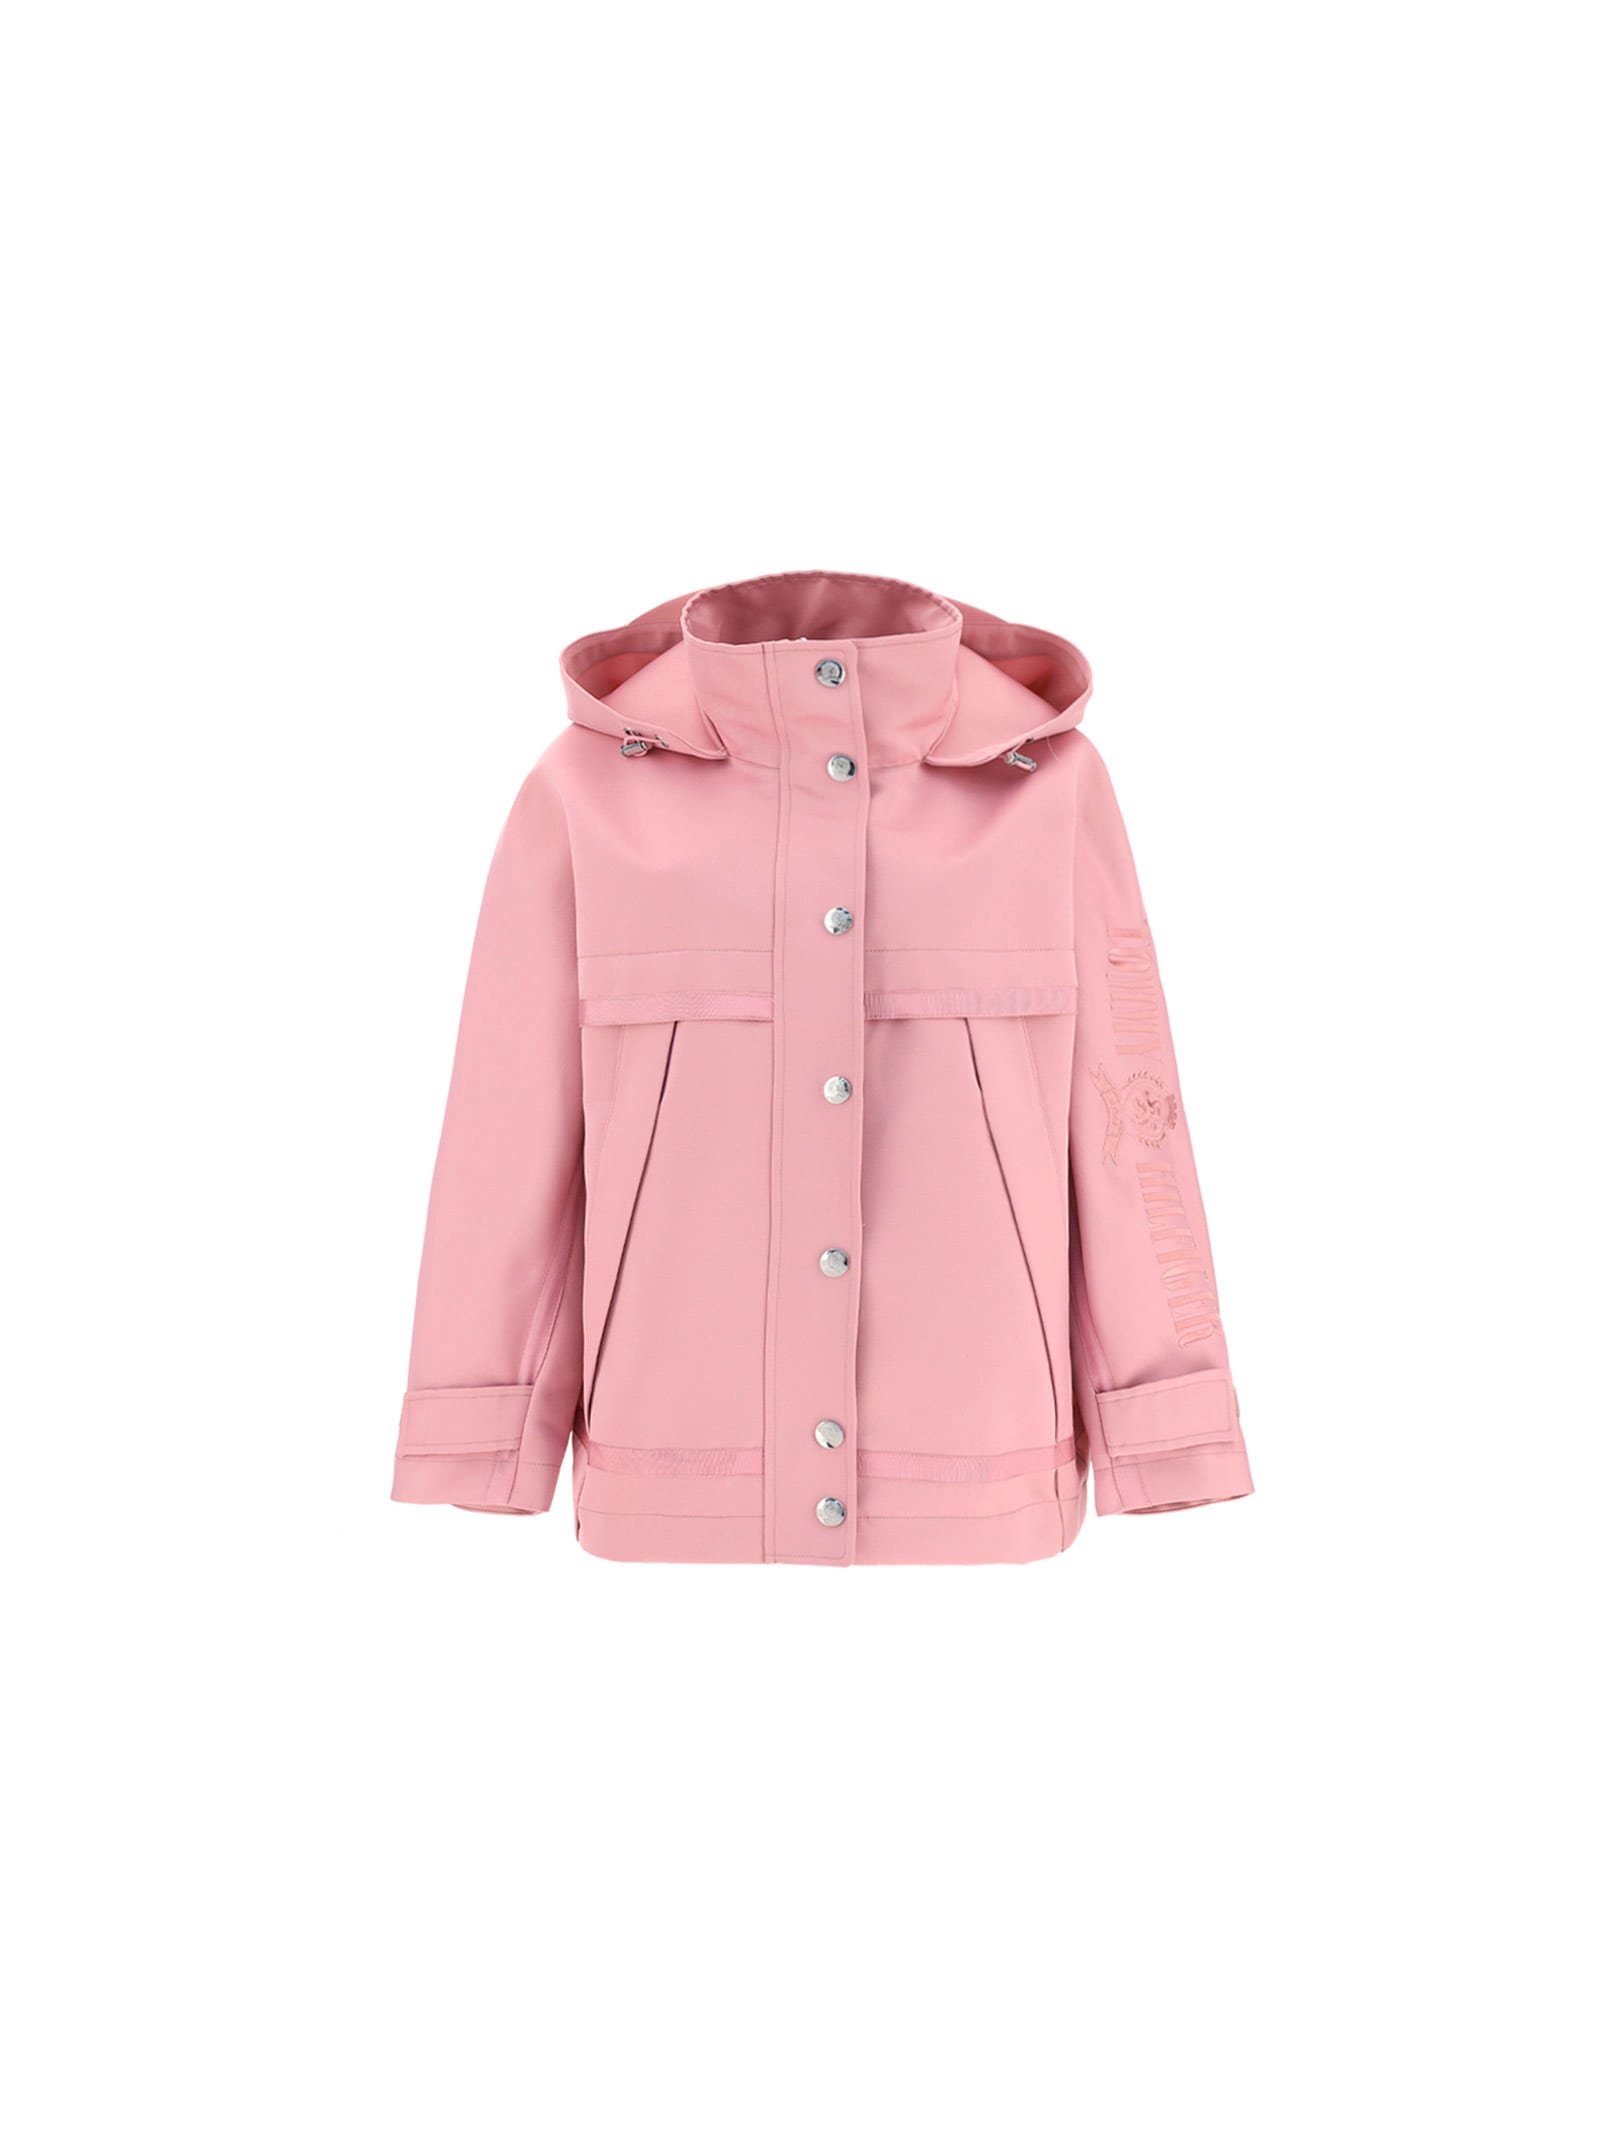 jelly darkness Removal Tommy Hilfiger Icon Sailing Jacket In Pastel Pink | ModeSens